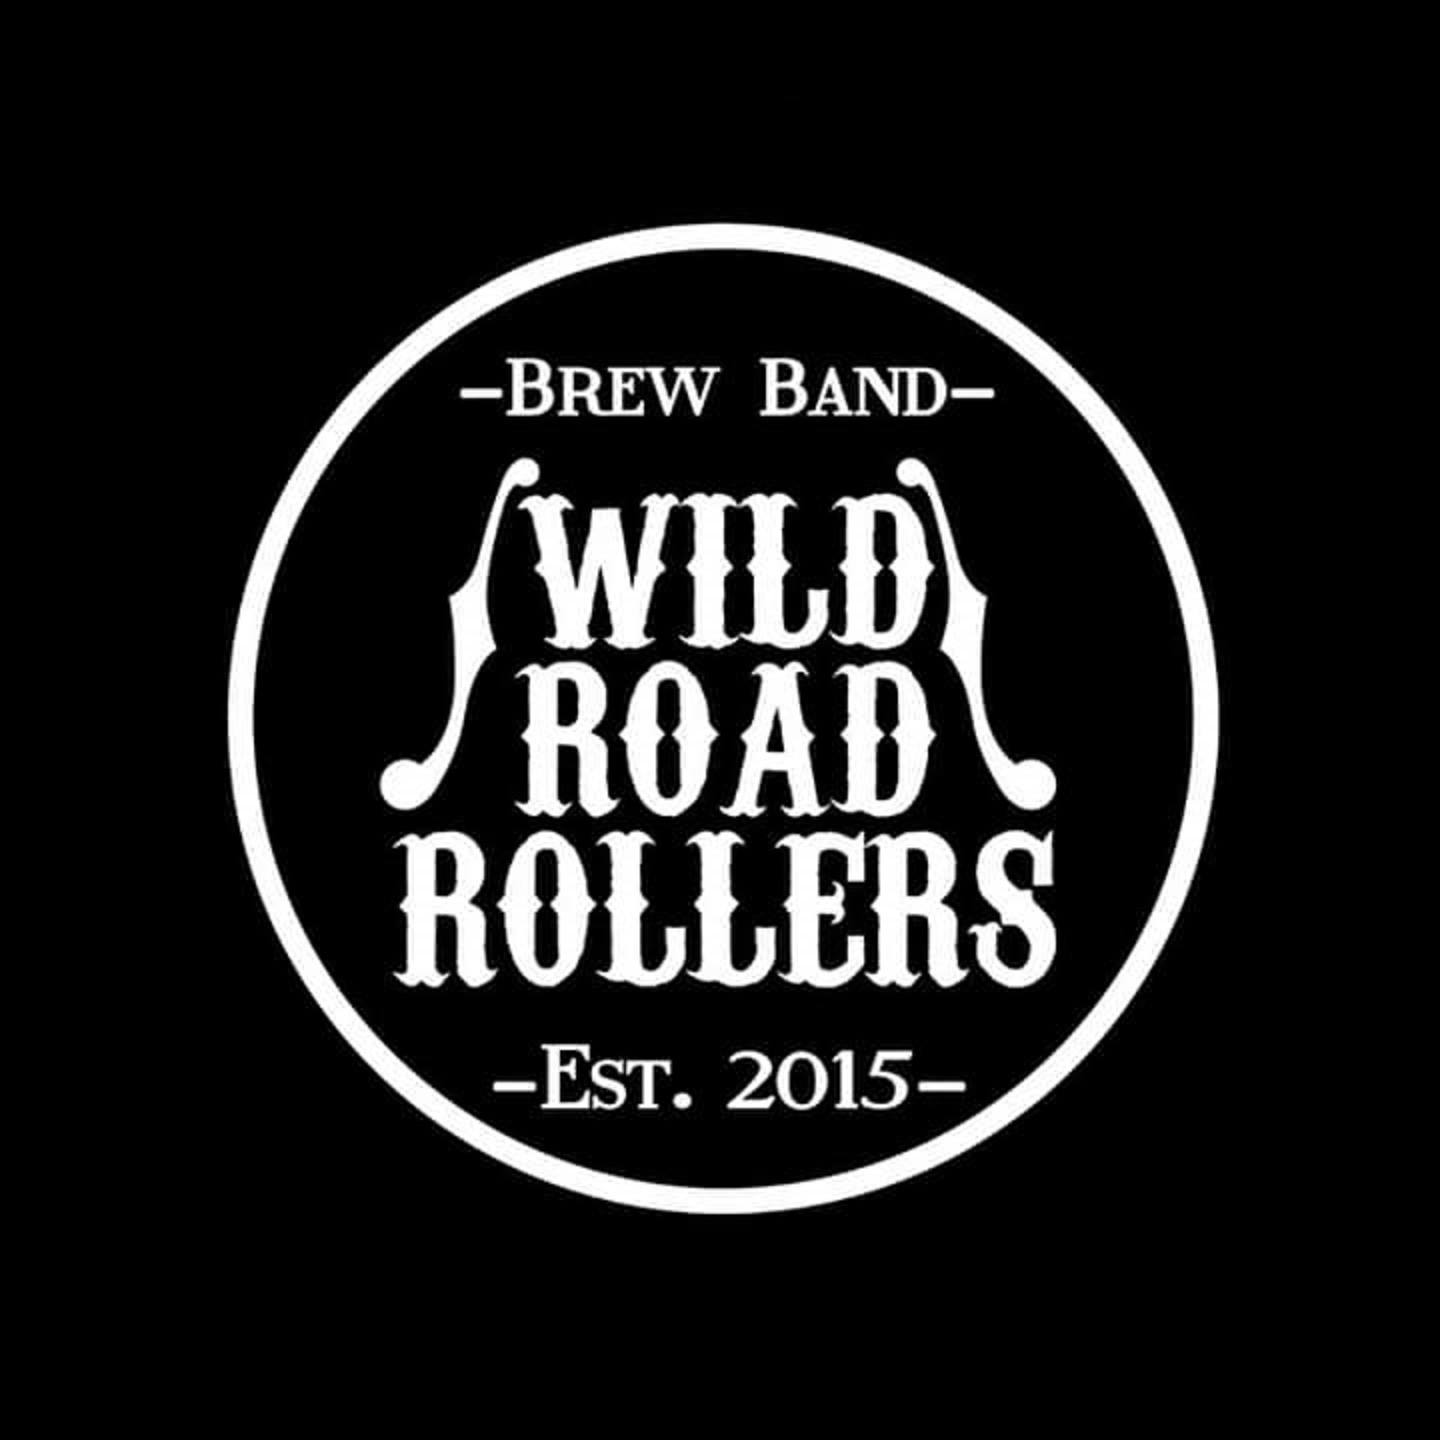 Wild Road Rollers – Imperial Stout Motor Oil